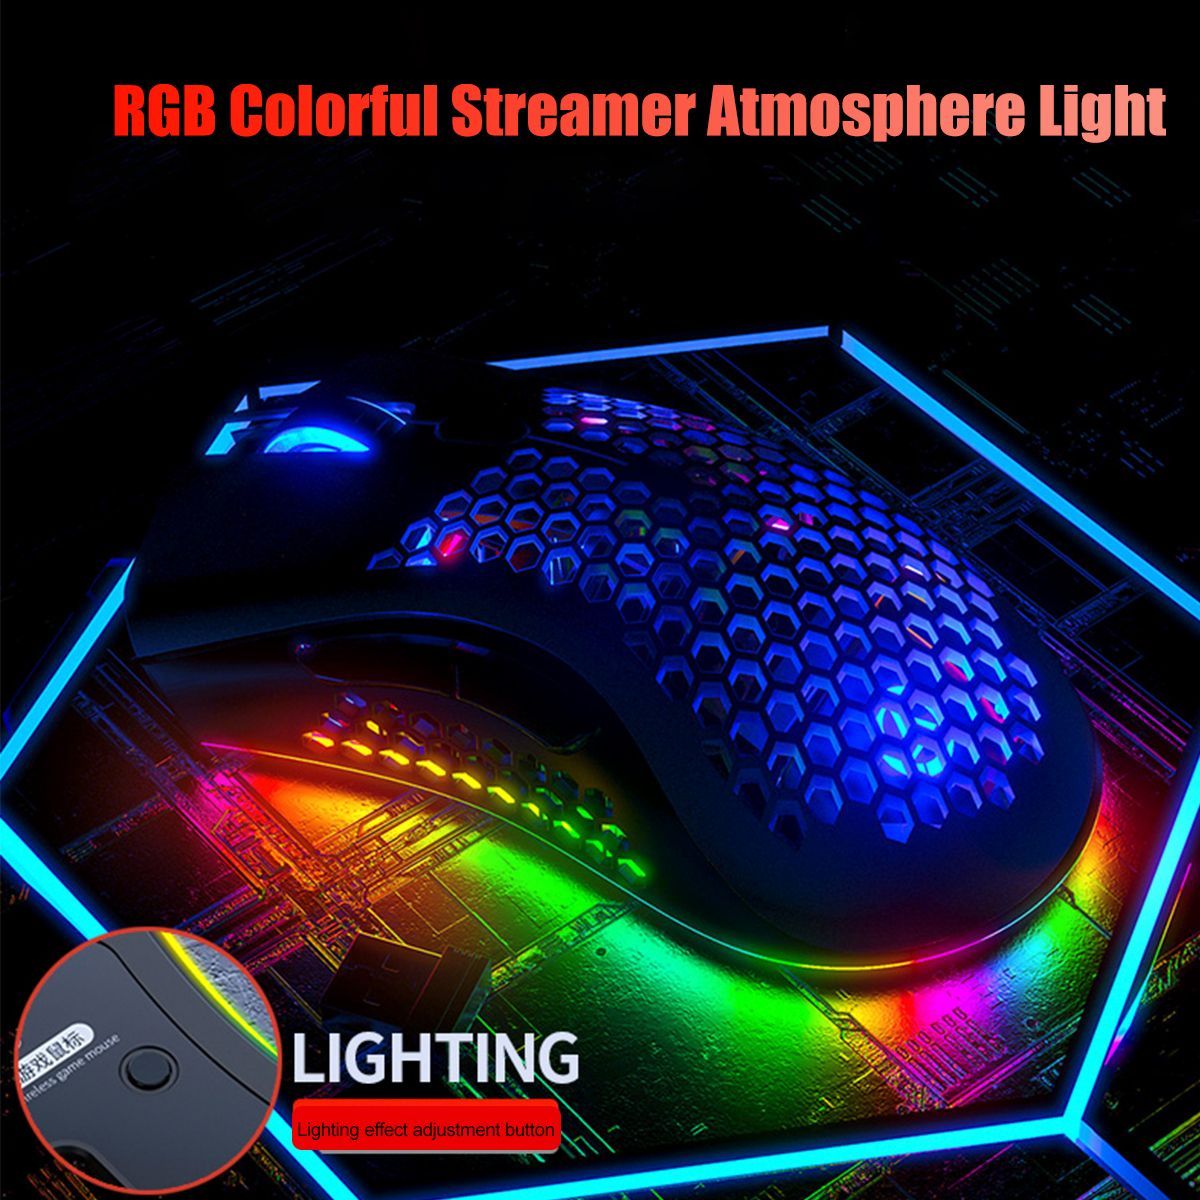 Wireless-Gaming-Mouse-Honeycomb-Hollow-RGB-Charging-Mouse-with-3-Adjustable-DPI-for-Desktop-Computer-1746676